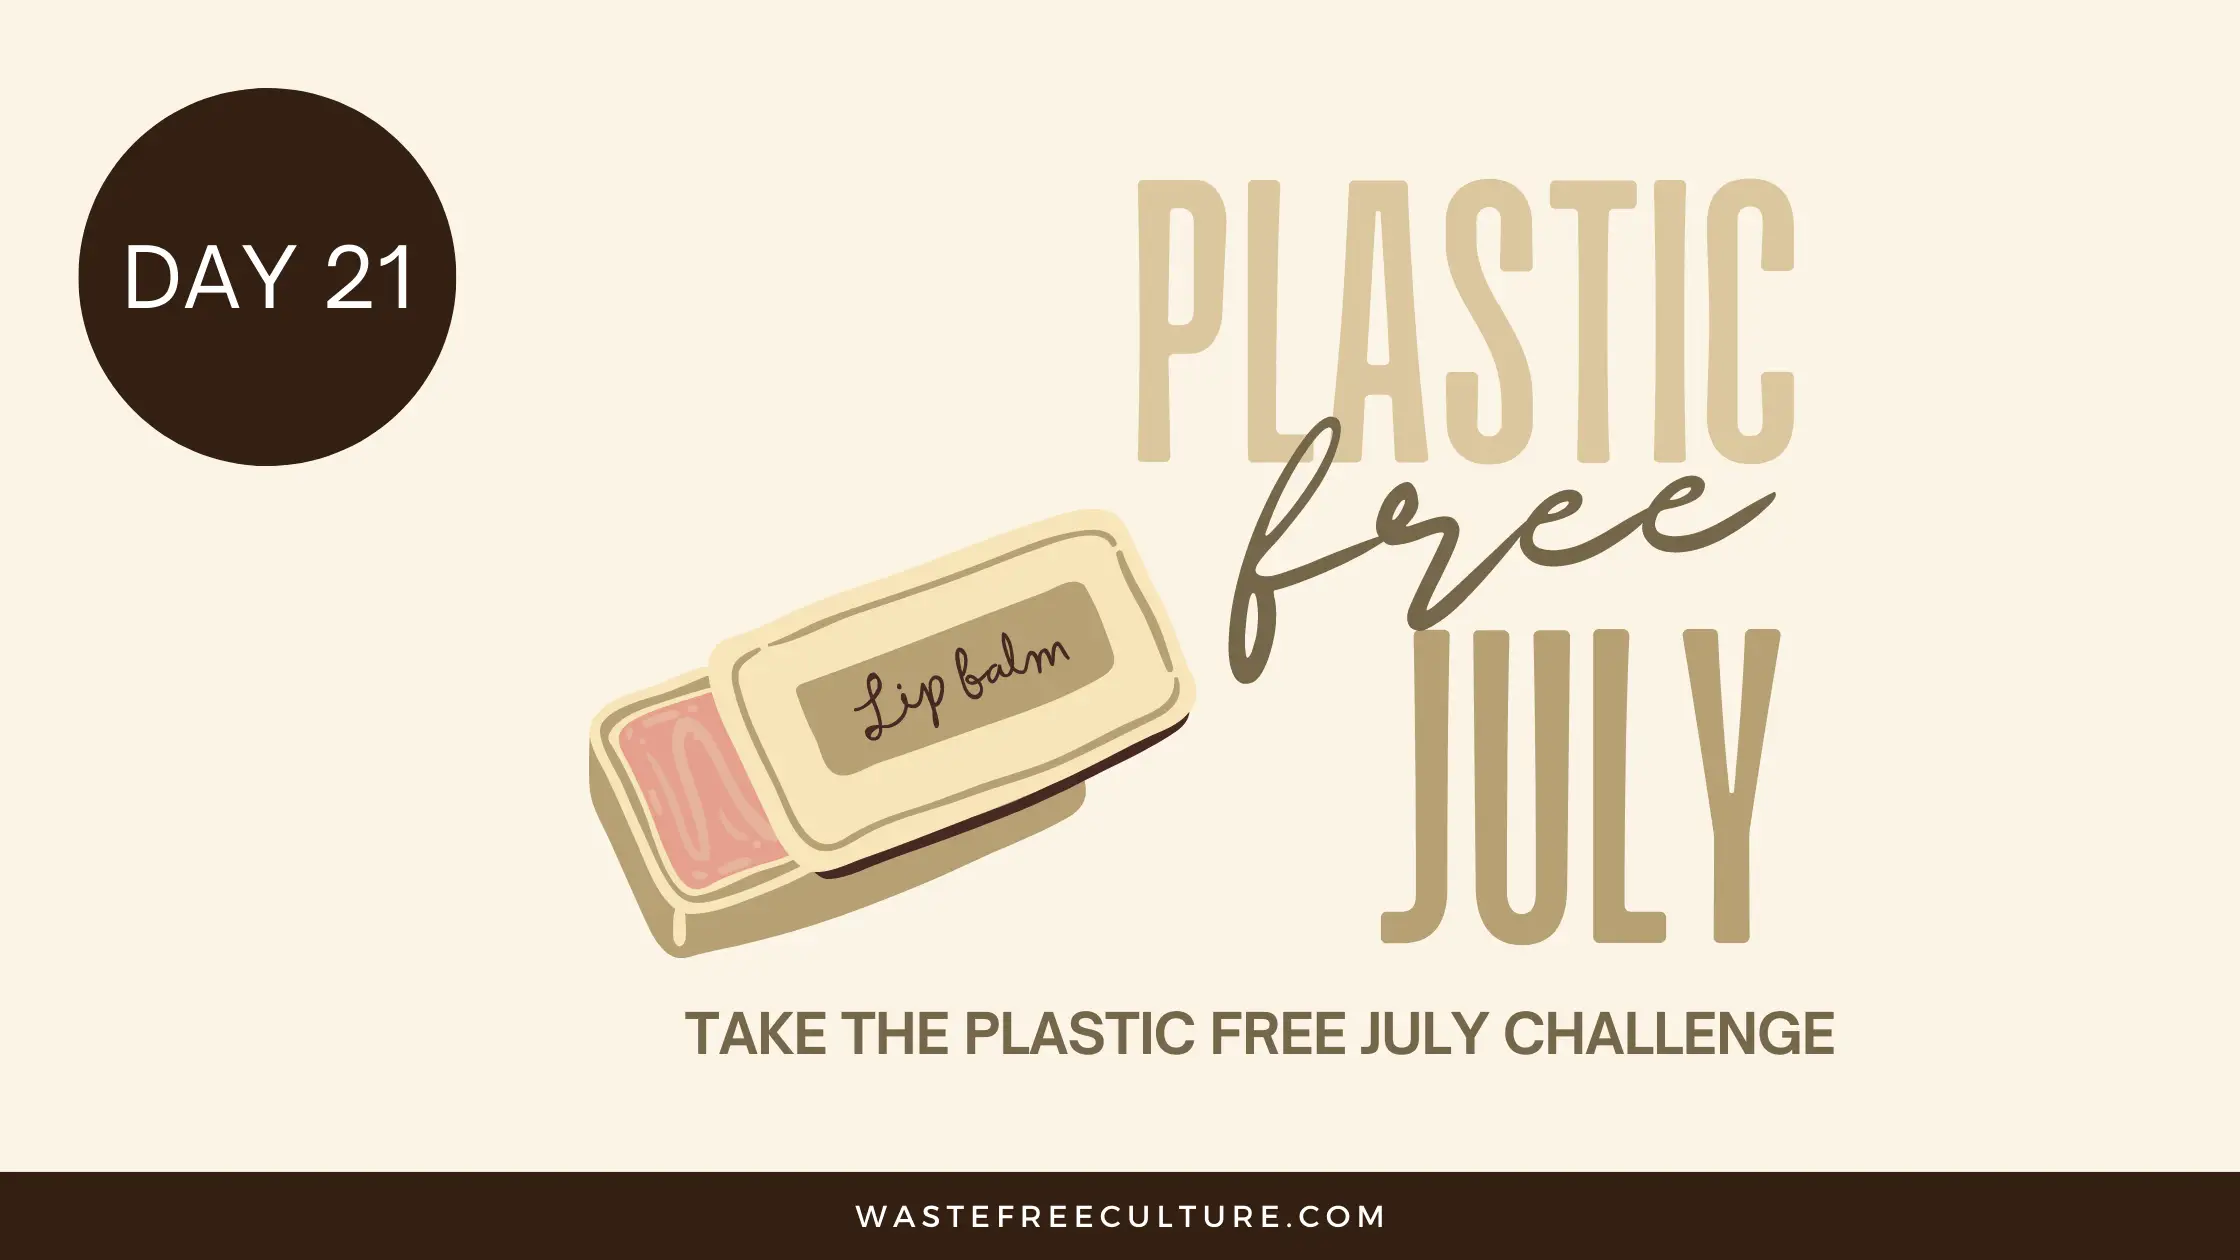 Day 21 of the Plastic Free July Challenge